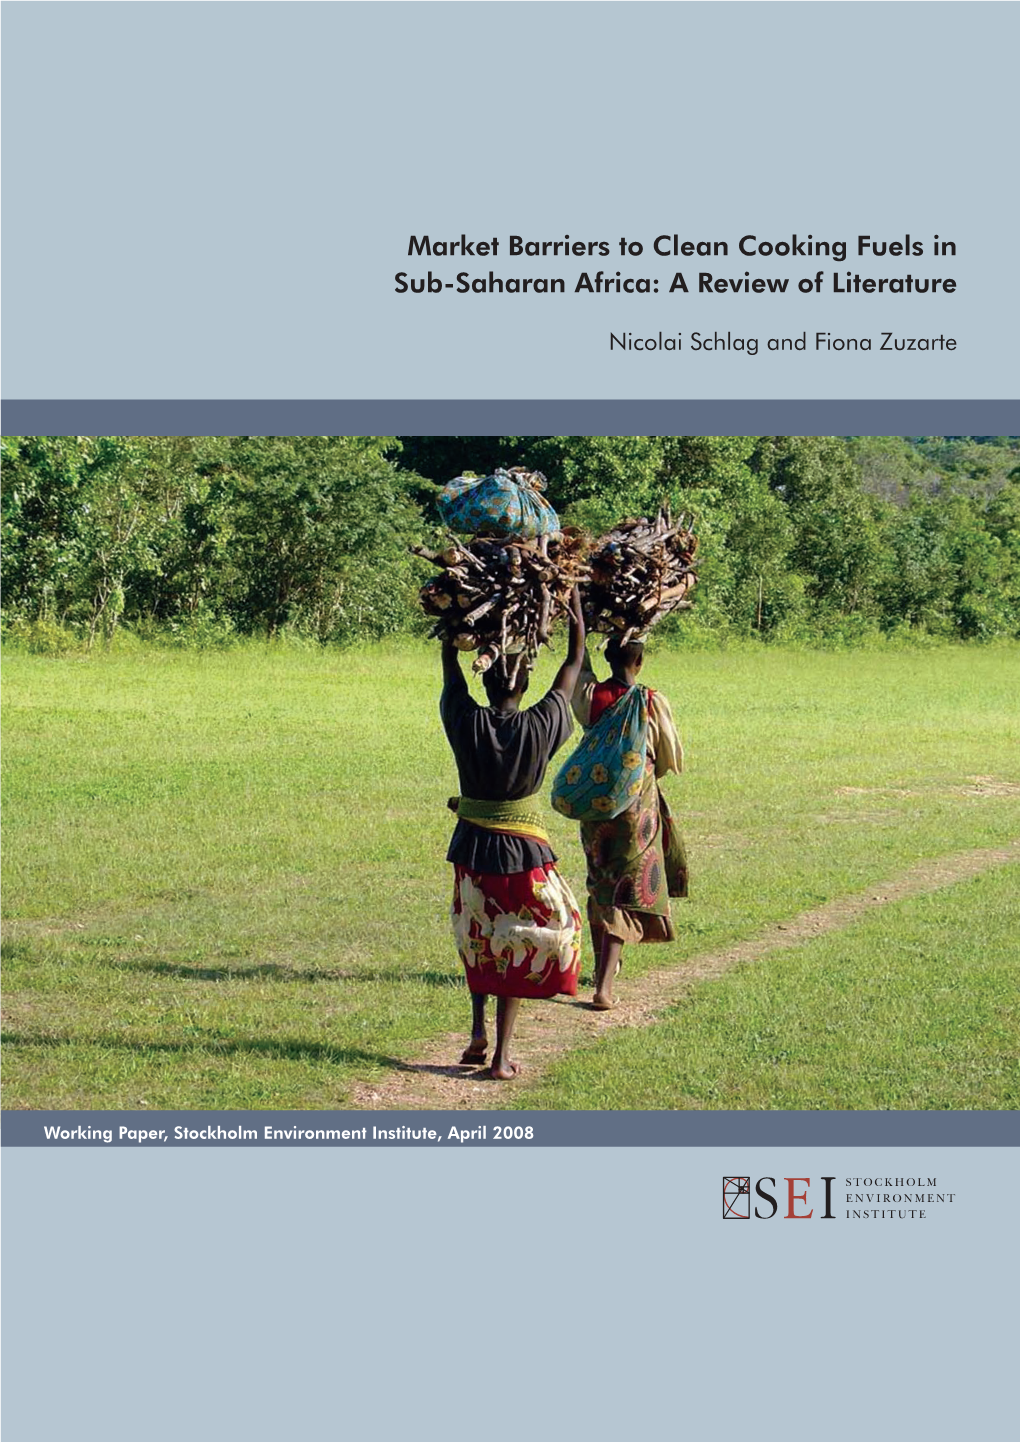 Market Barriers to Clean Cooking Fuels in Sub-Saharan Africa: a Review of Literature